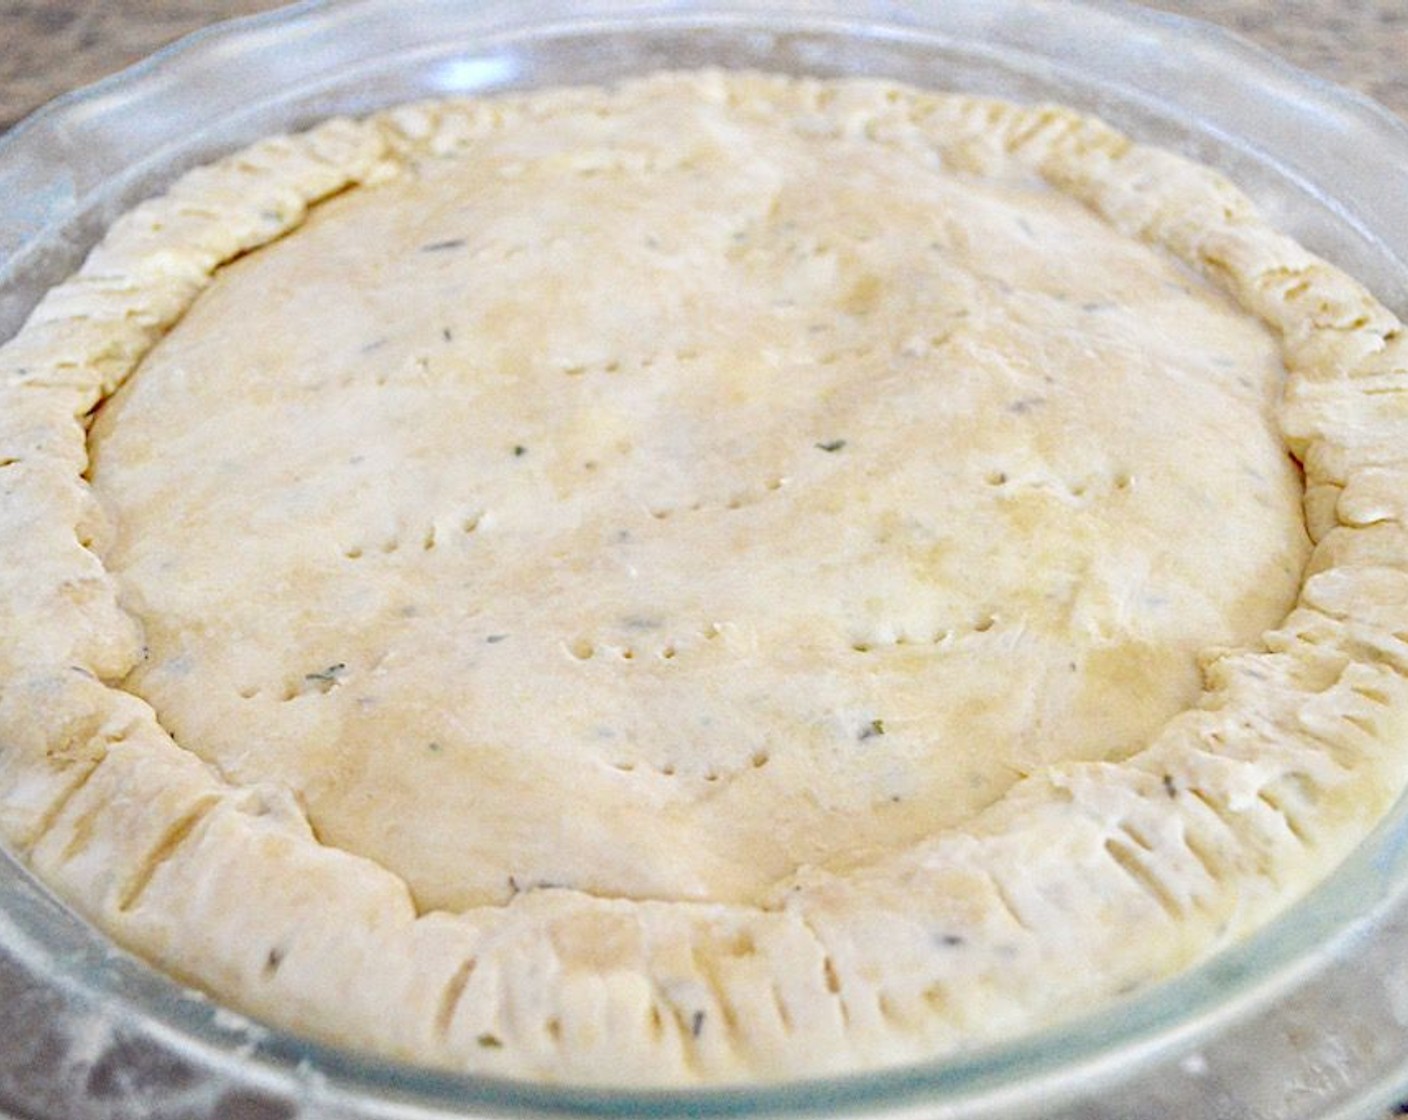 step 8 Spoon the filling into the crust and press it into a firm, even layer. Then take the second disc of dough out and roll it into another 10 inch disc. Place it on top of the filling and crimp the edges together firmly with the edges of the bottom disc.